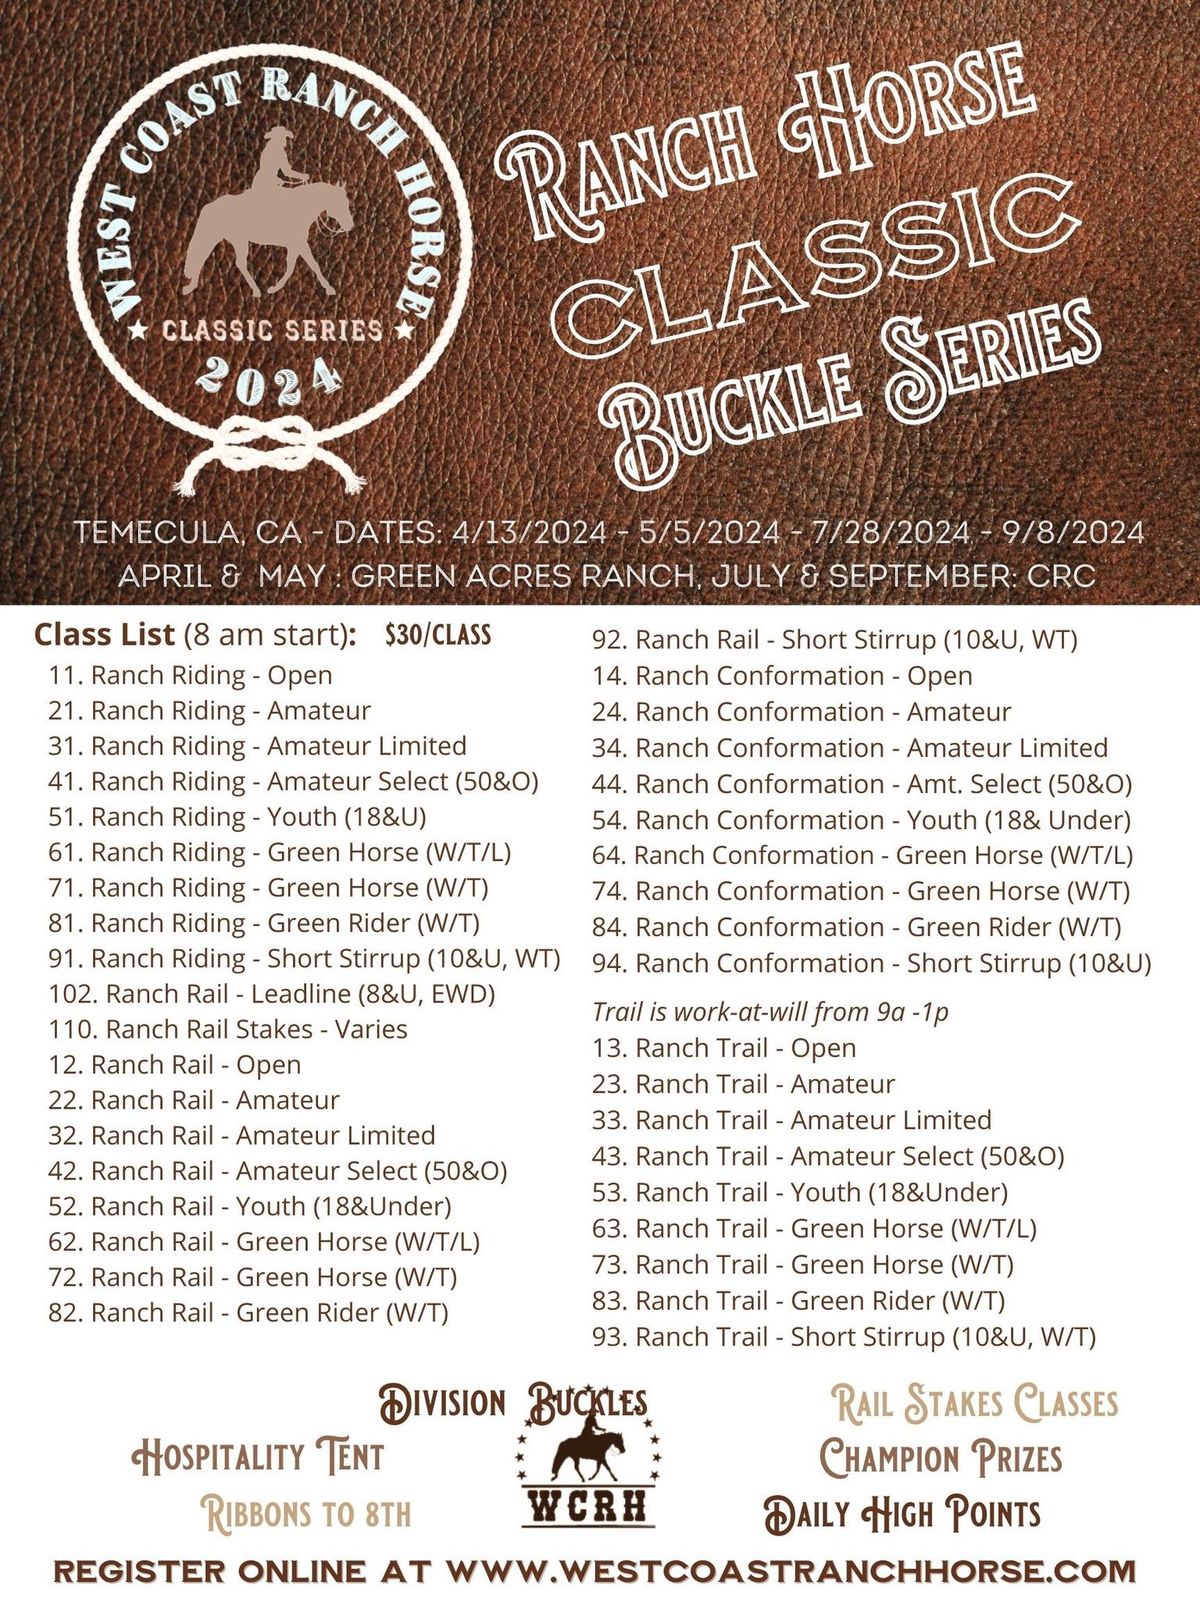 Ranch Horse Classic Buckle Series Show #2 (West Coast Ranch Horse)